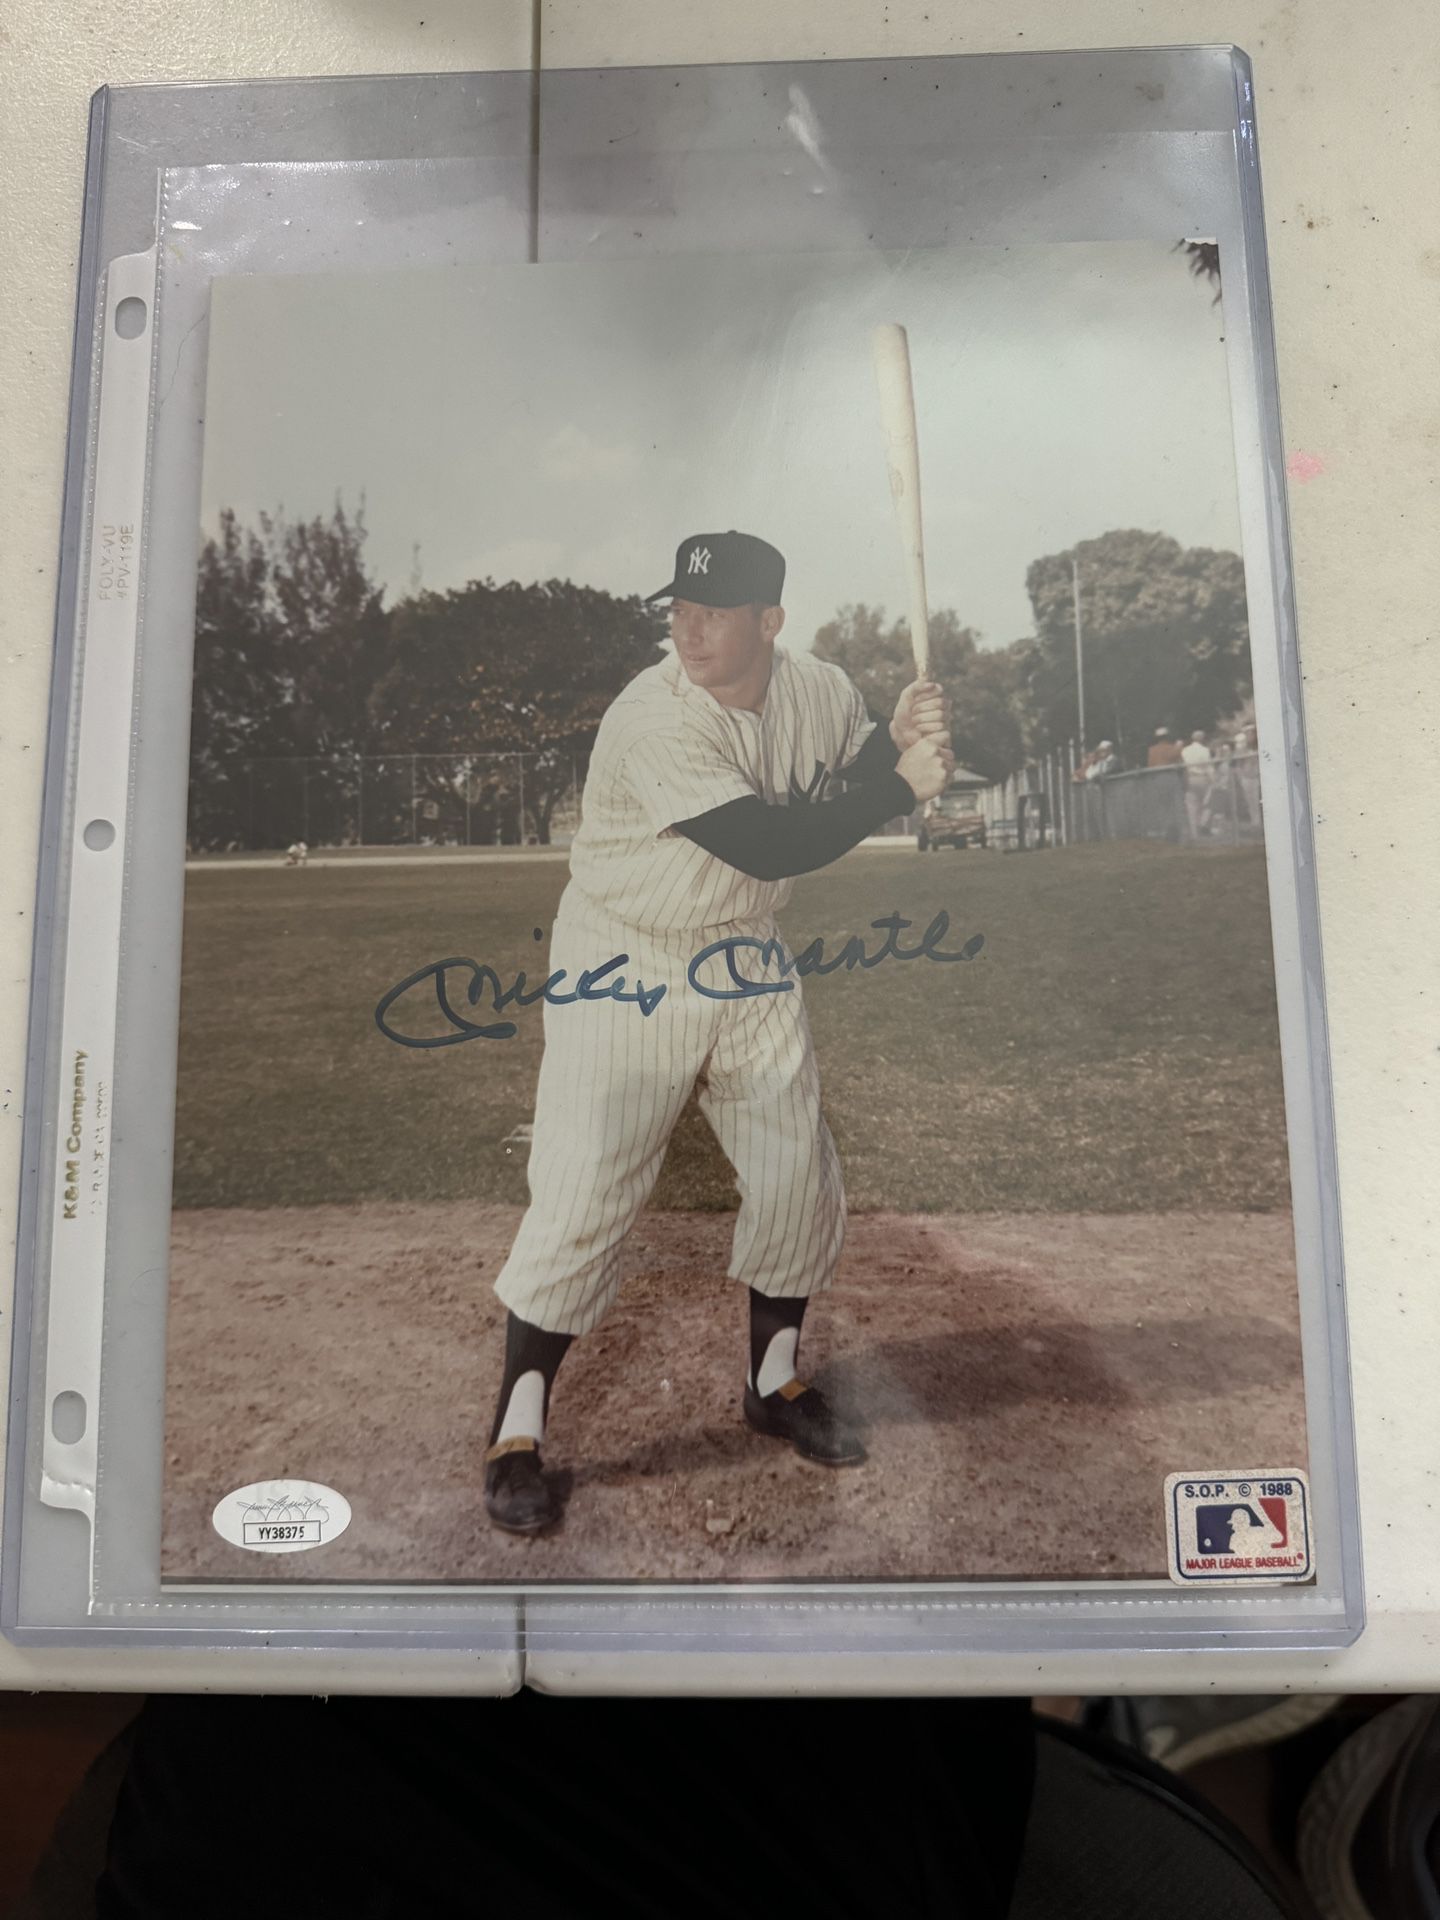  New York Yankees Mickey Mantle  Signed / Autographed JSA Certified Photo